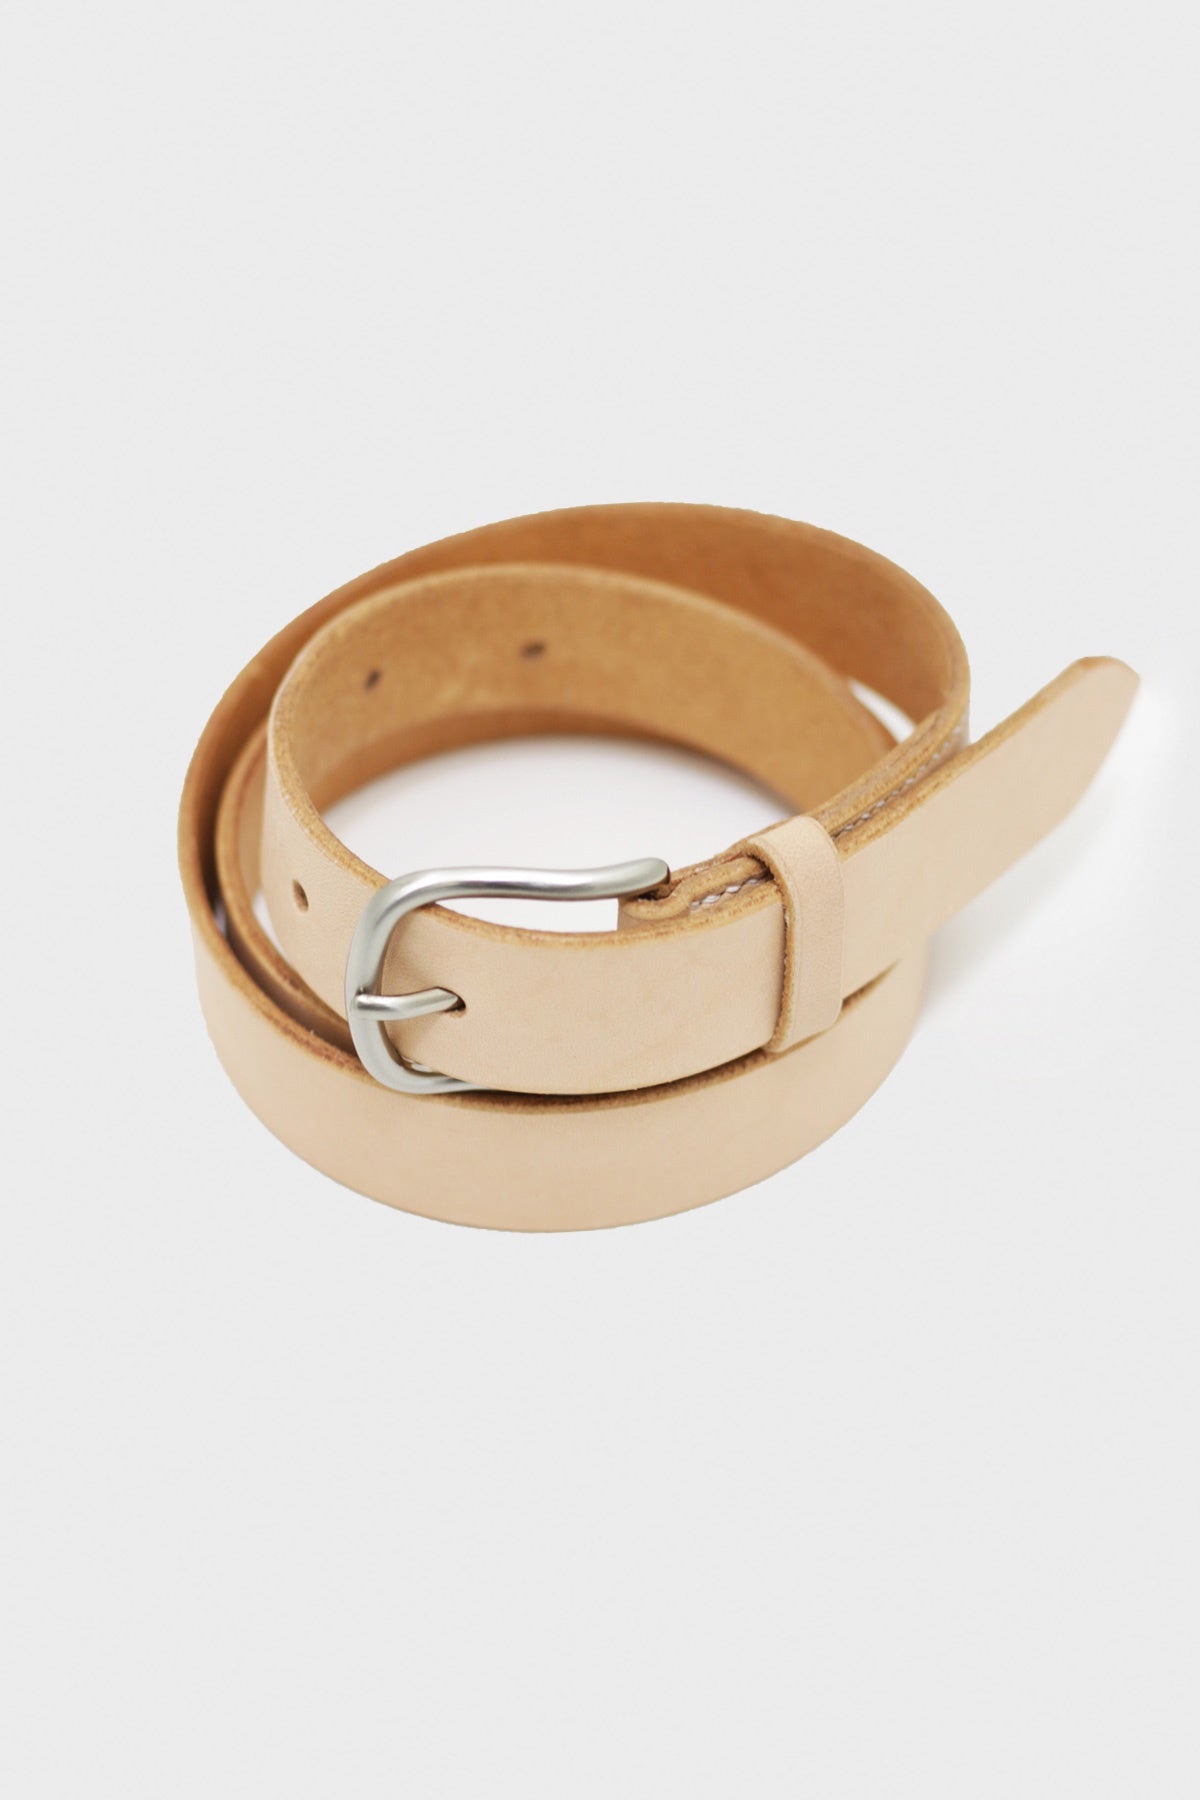 Natural Vegetable Leather and Silver Buckle Belt - laperruque